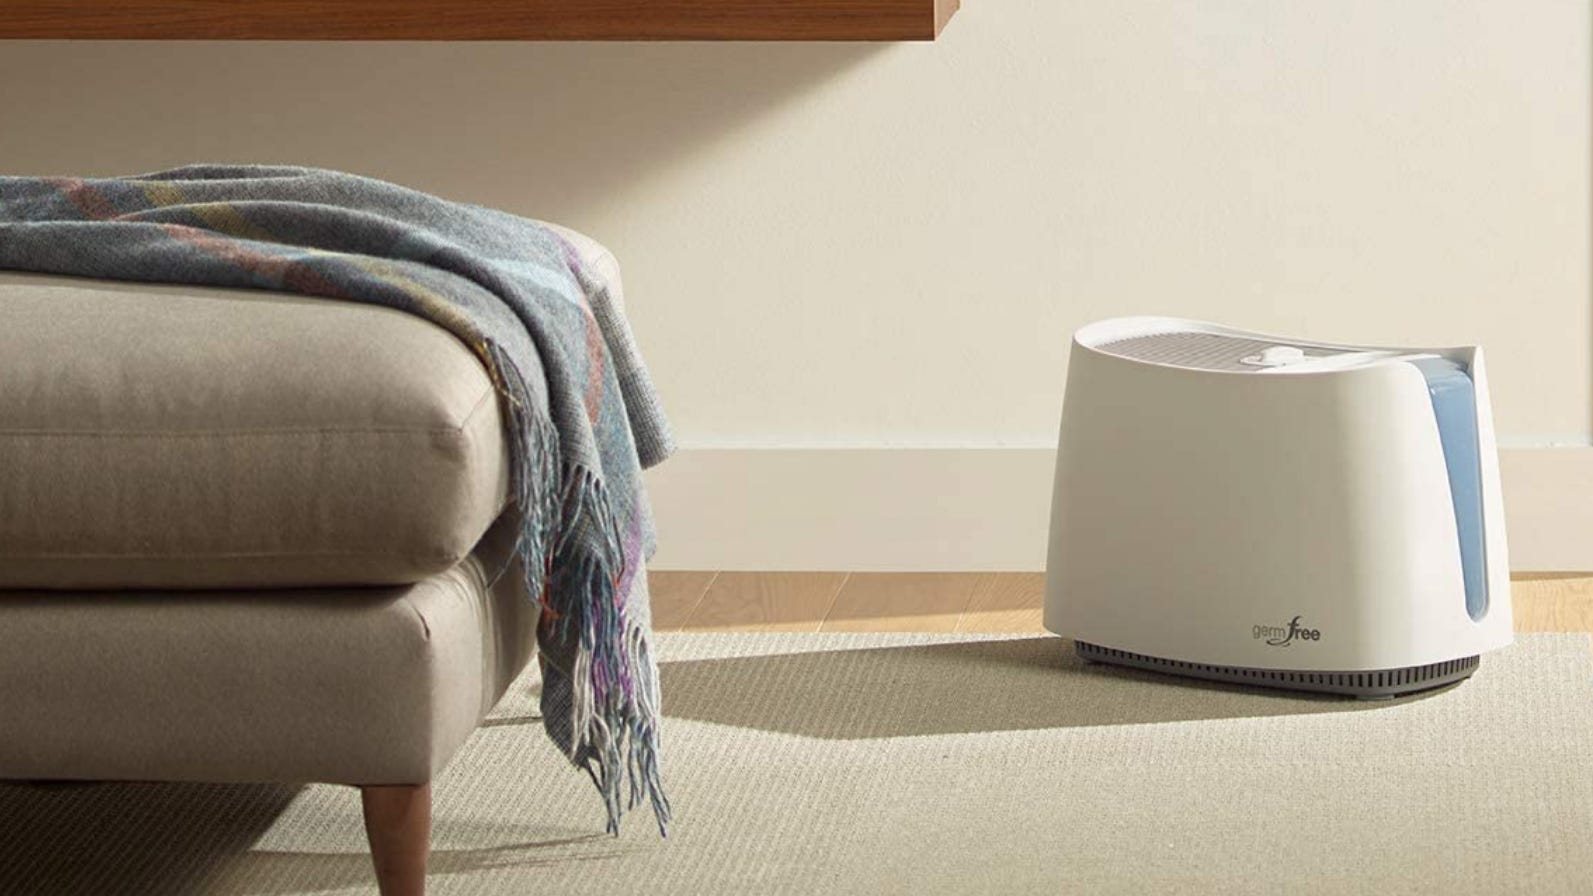 This Honeywell humidifier is trending for the wrong reason—here's what to buy instead